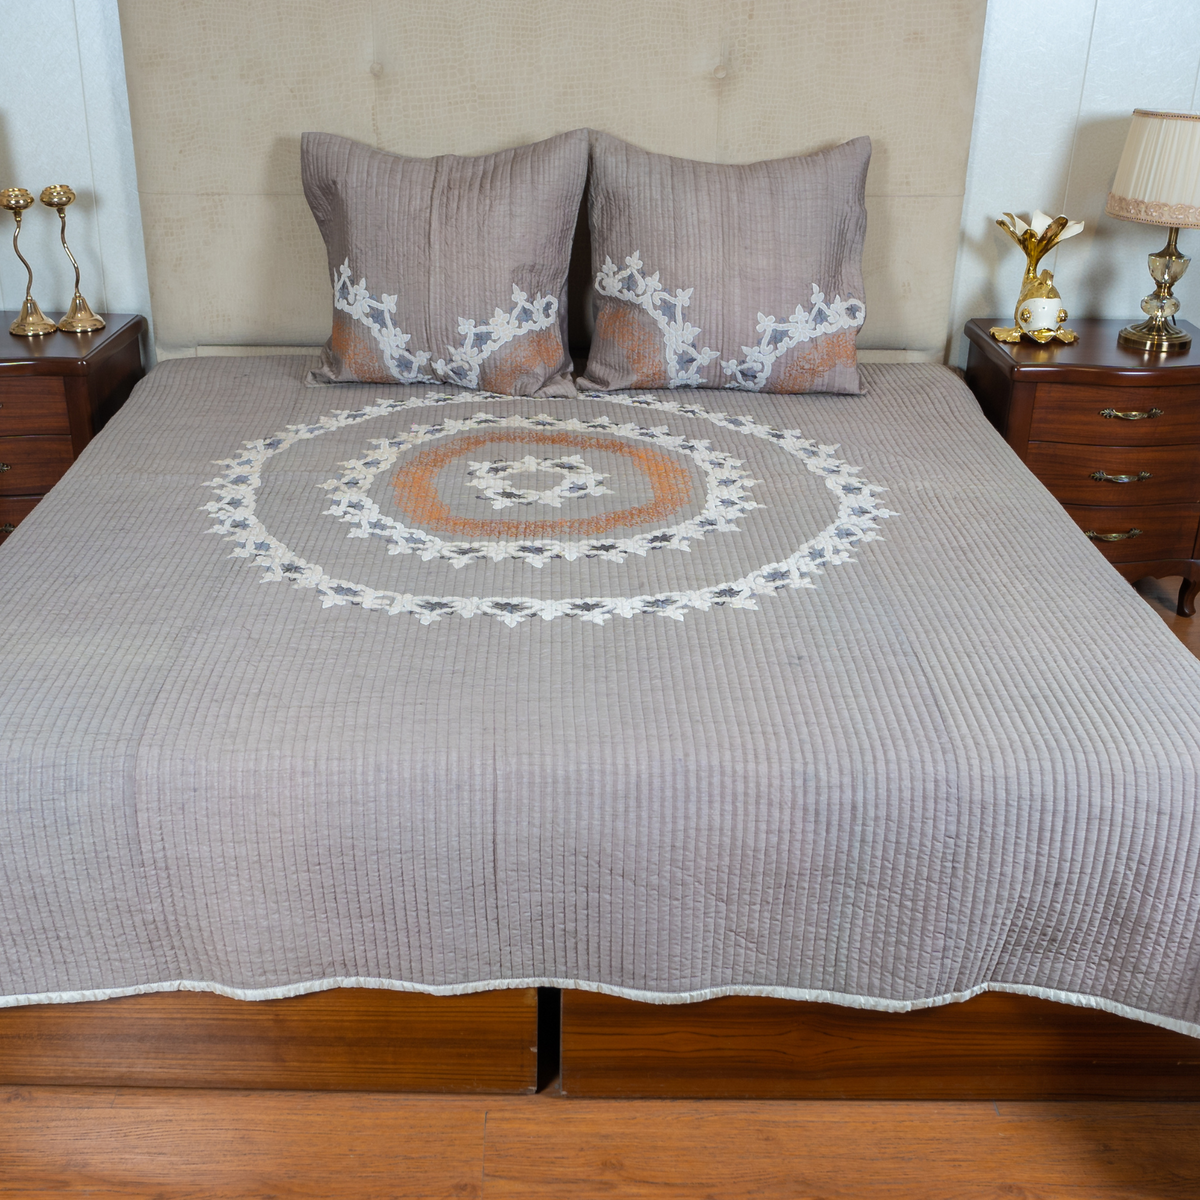 The LuxeLife Silk Embroidered Bedcover